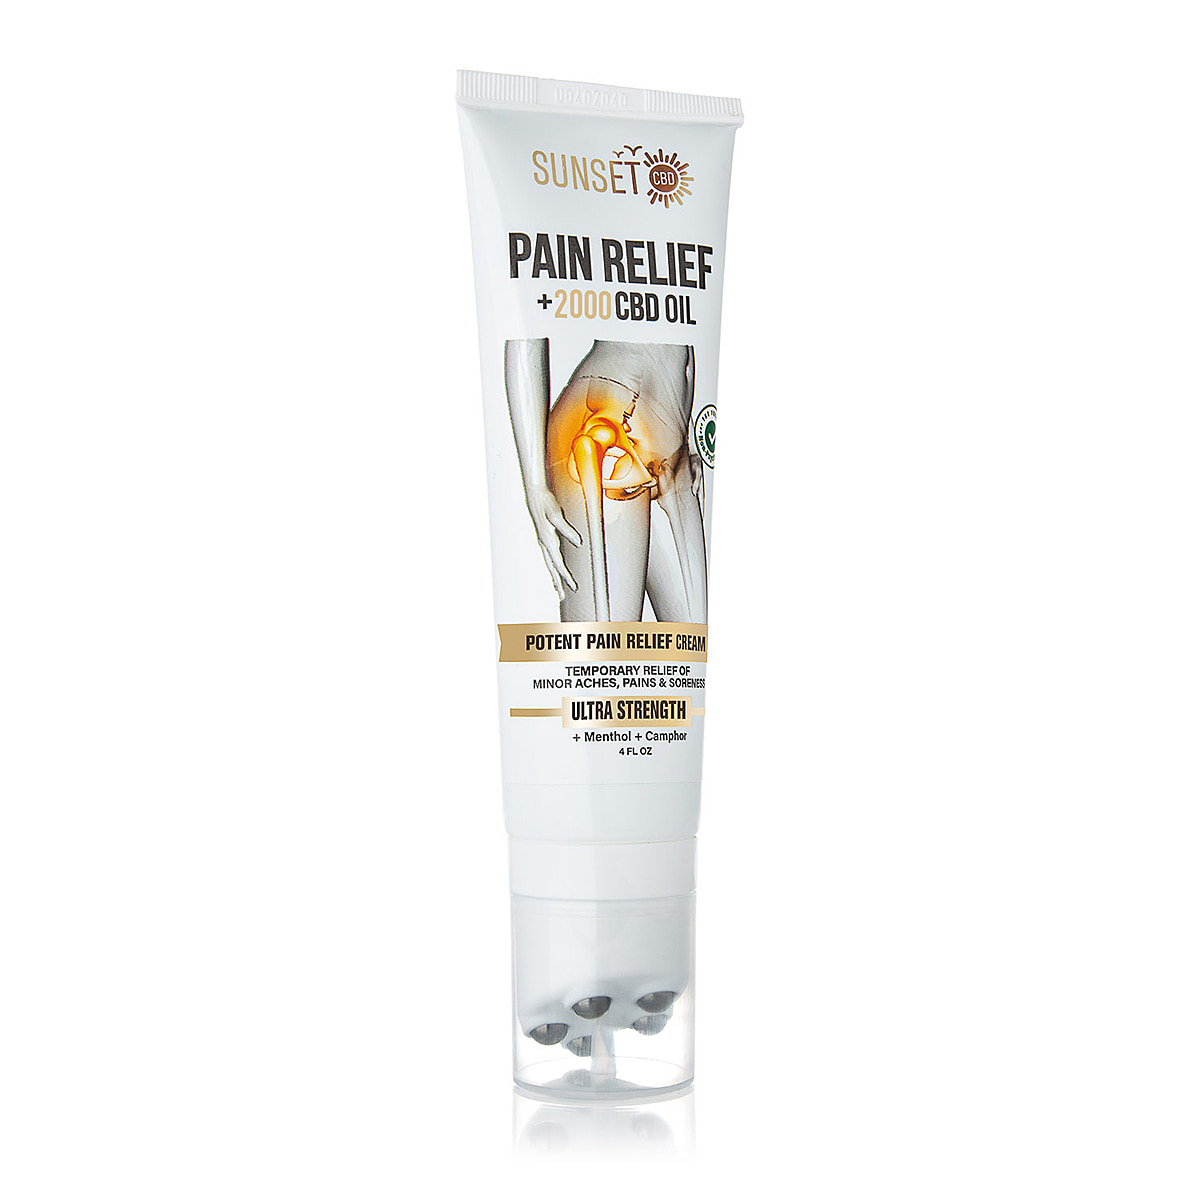 Sunset-Pain-Relief-2000mg-CBD-Potent-Pain-Relief-Cream-with-roll-on-Me